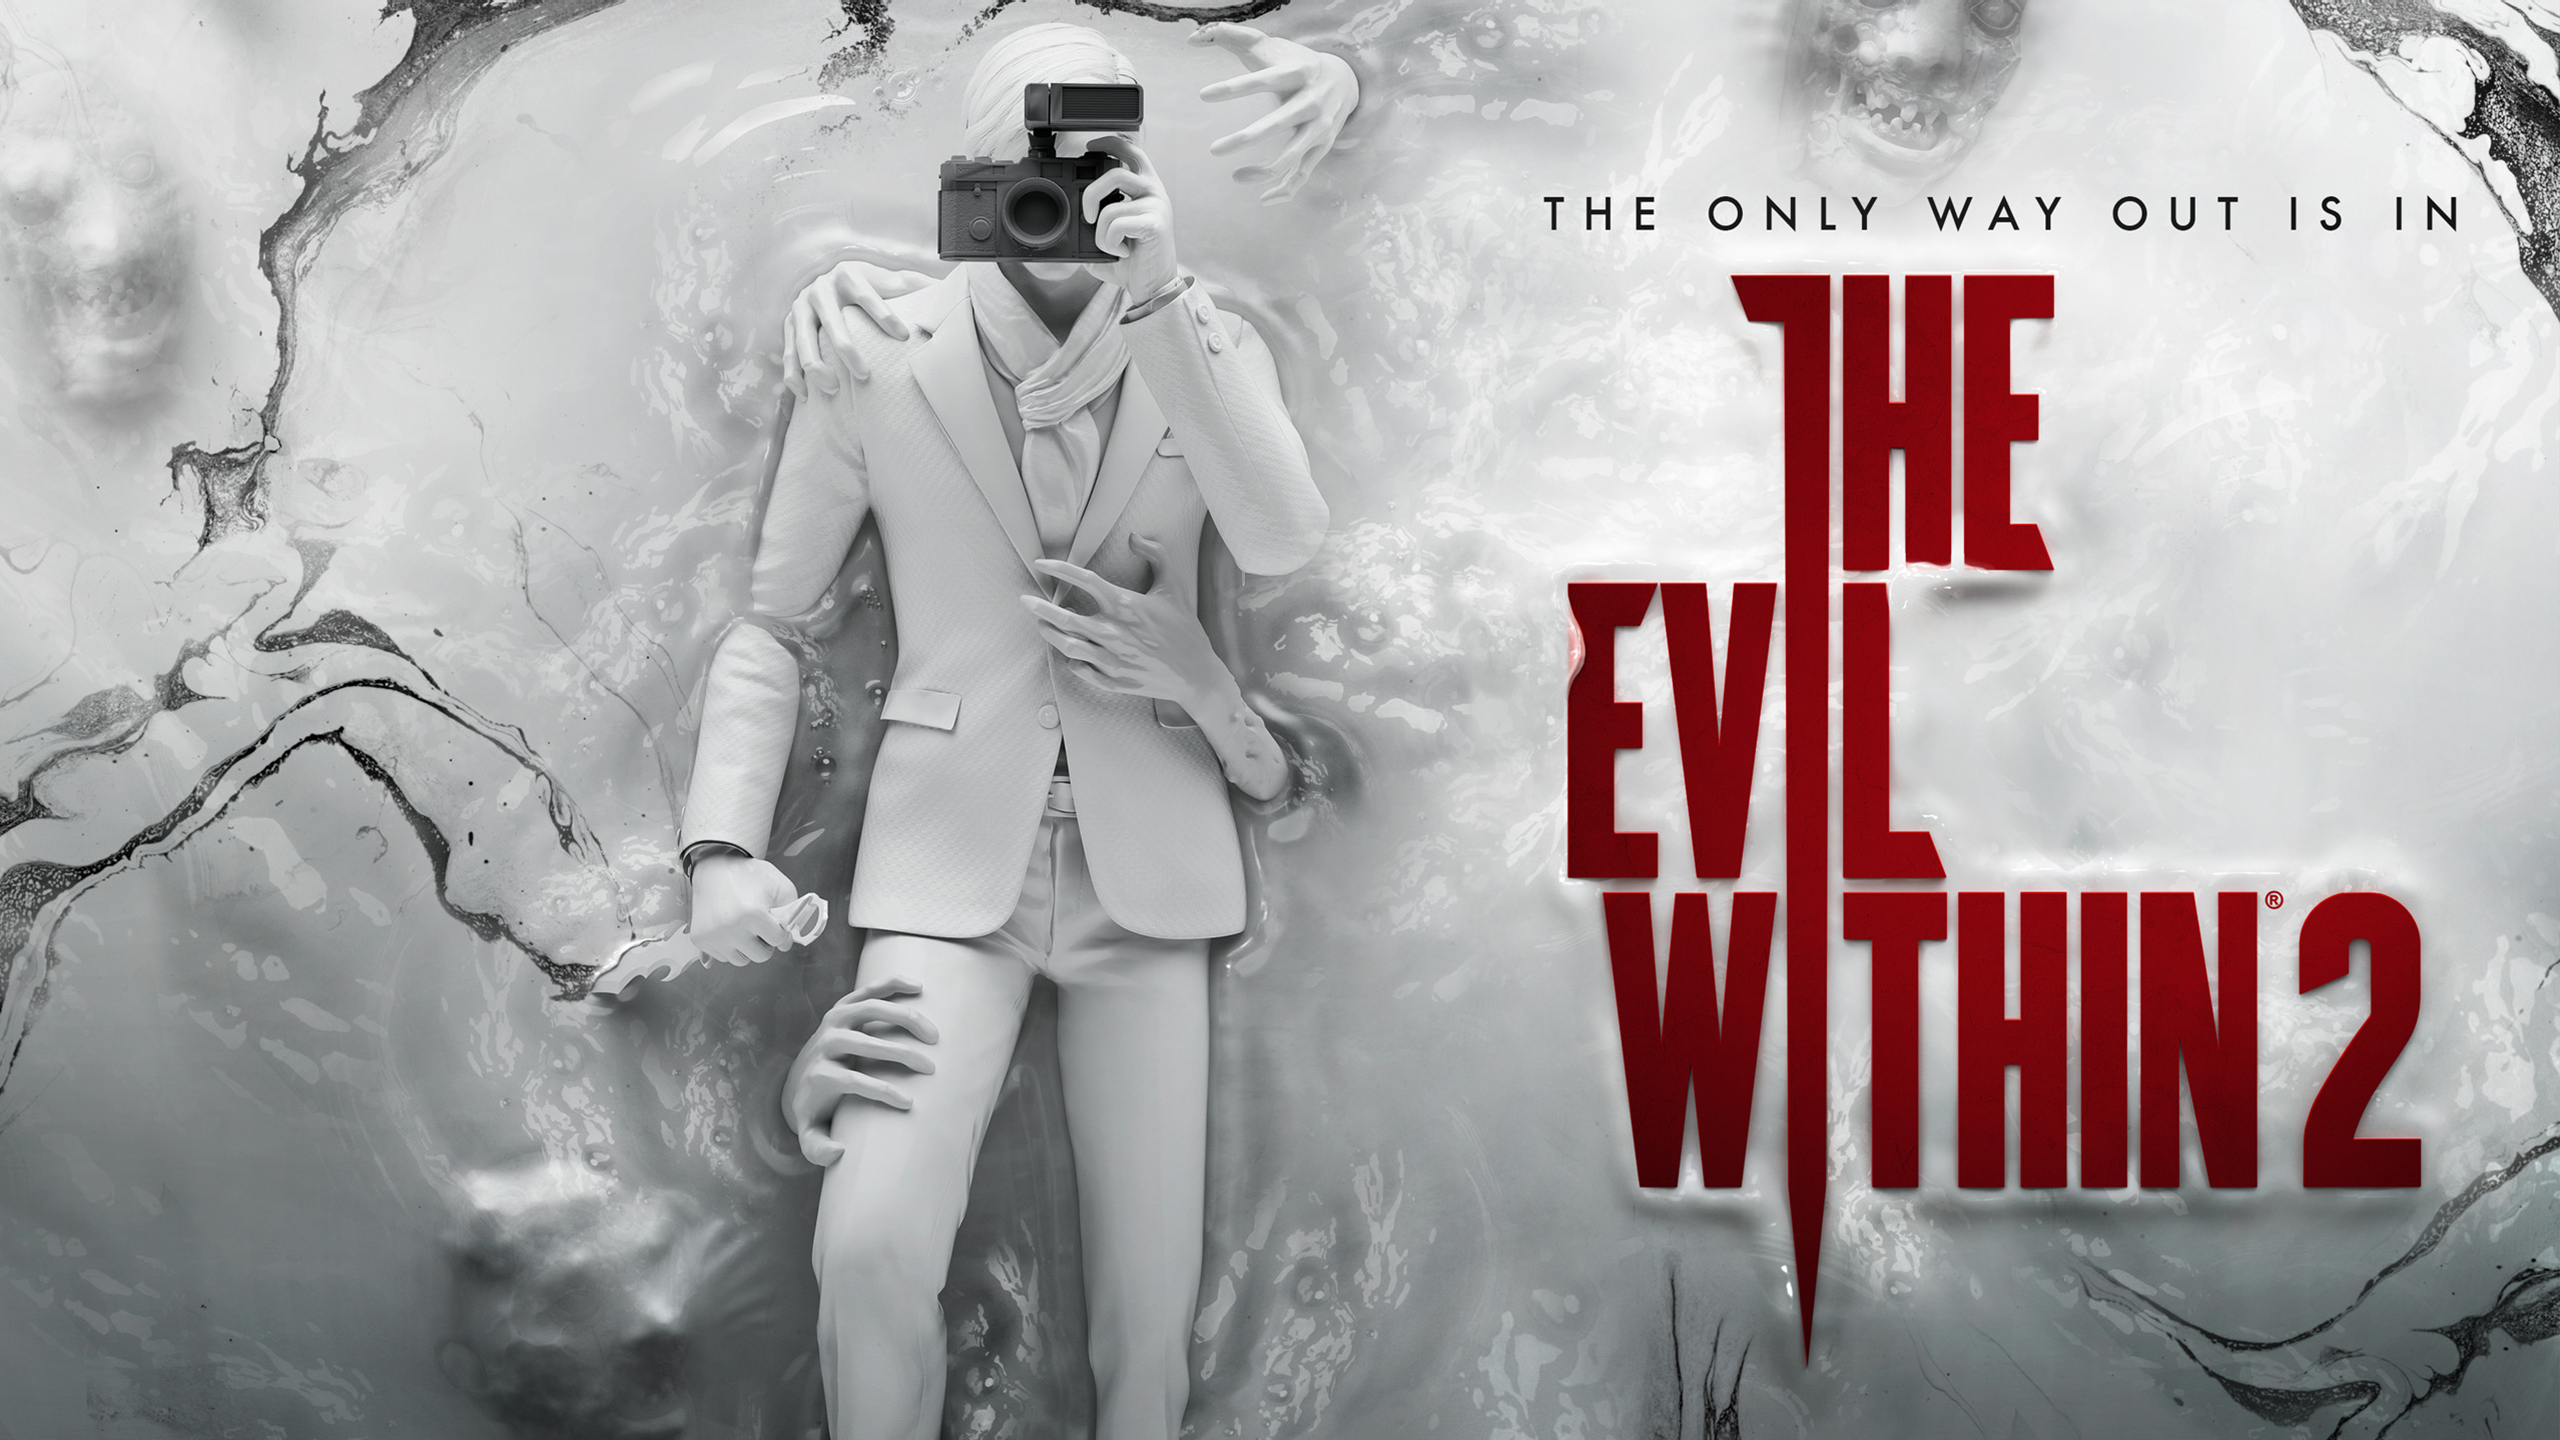 video game, the evil within 2, stefano valentini